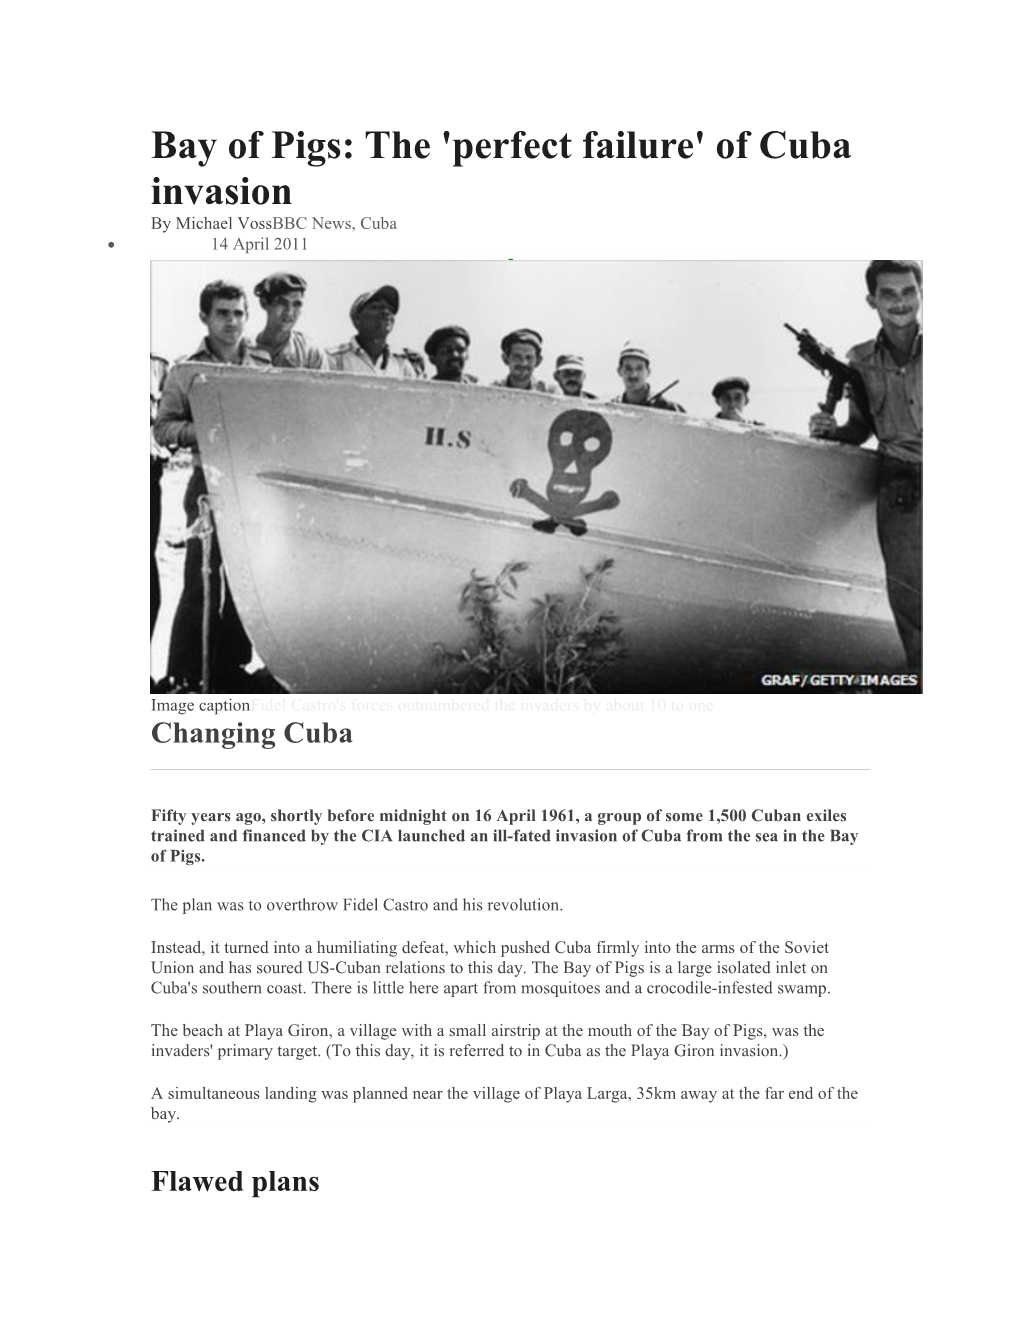 Bay of Pigs: the 'Perfect Failure' of Cuba Invasion